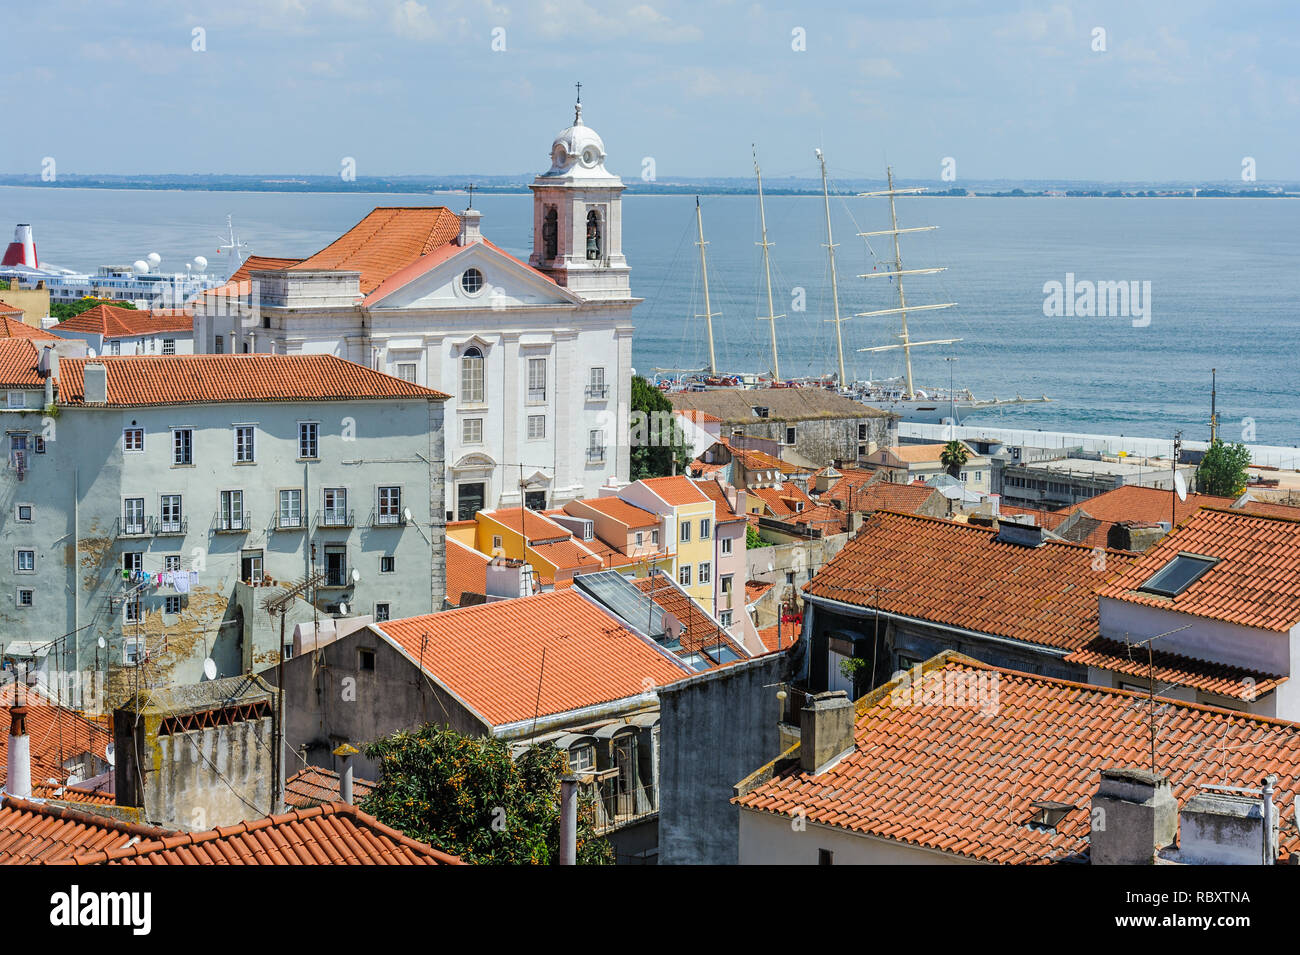 The red roofs of the old houses in the Alfama district in Lisbon, Portugal. Stock Photo